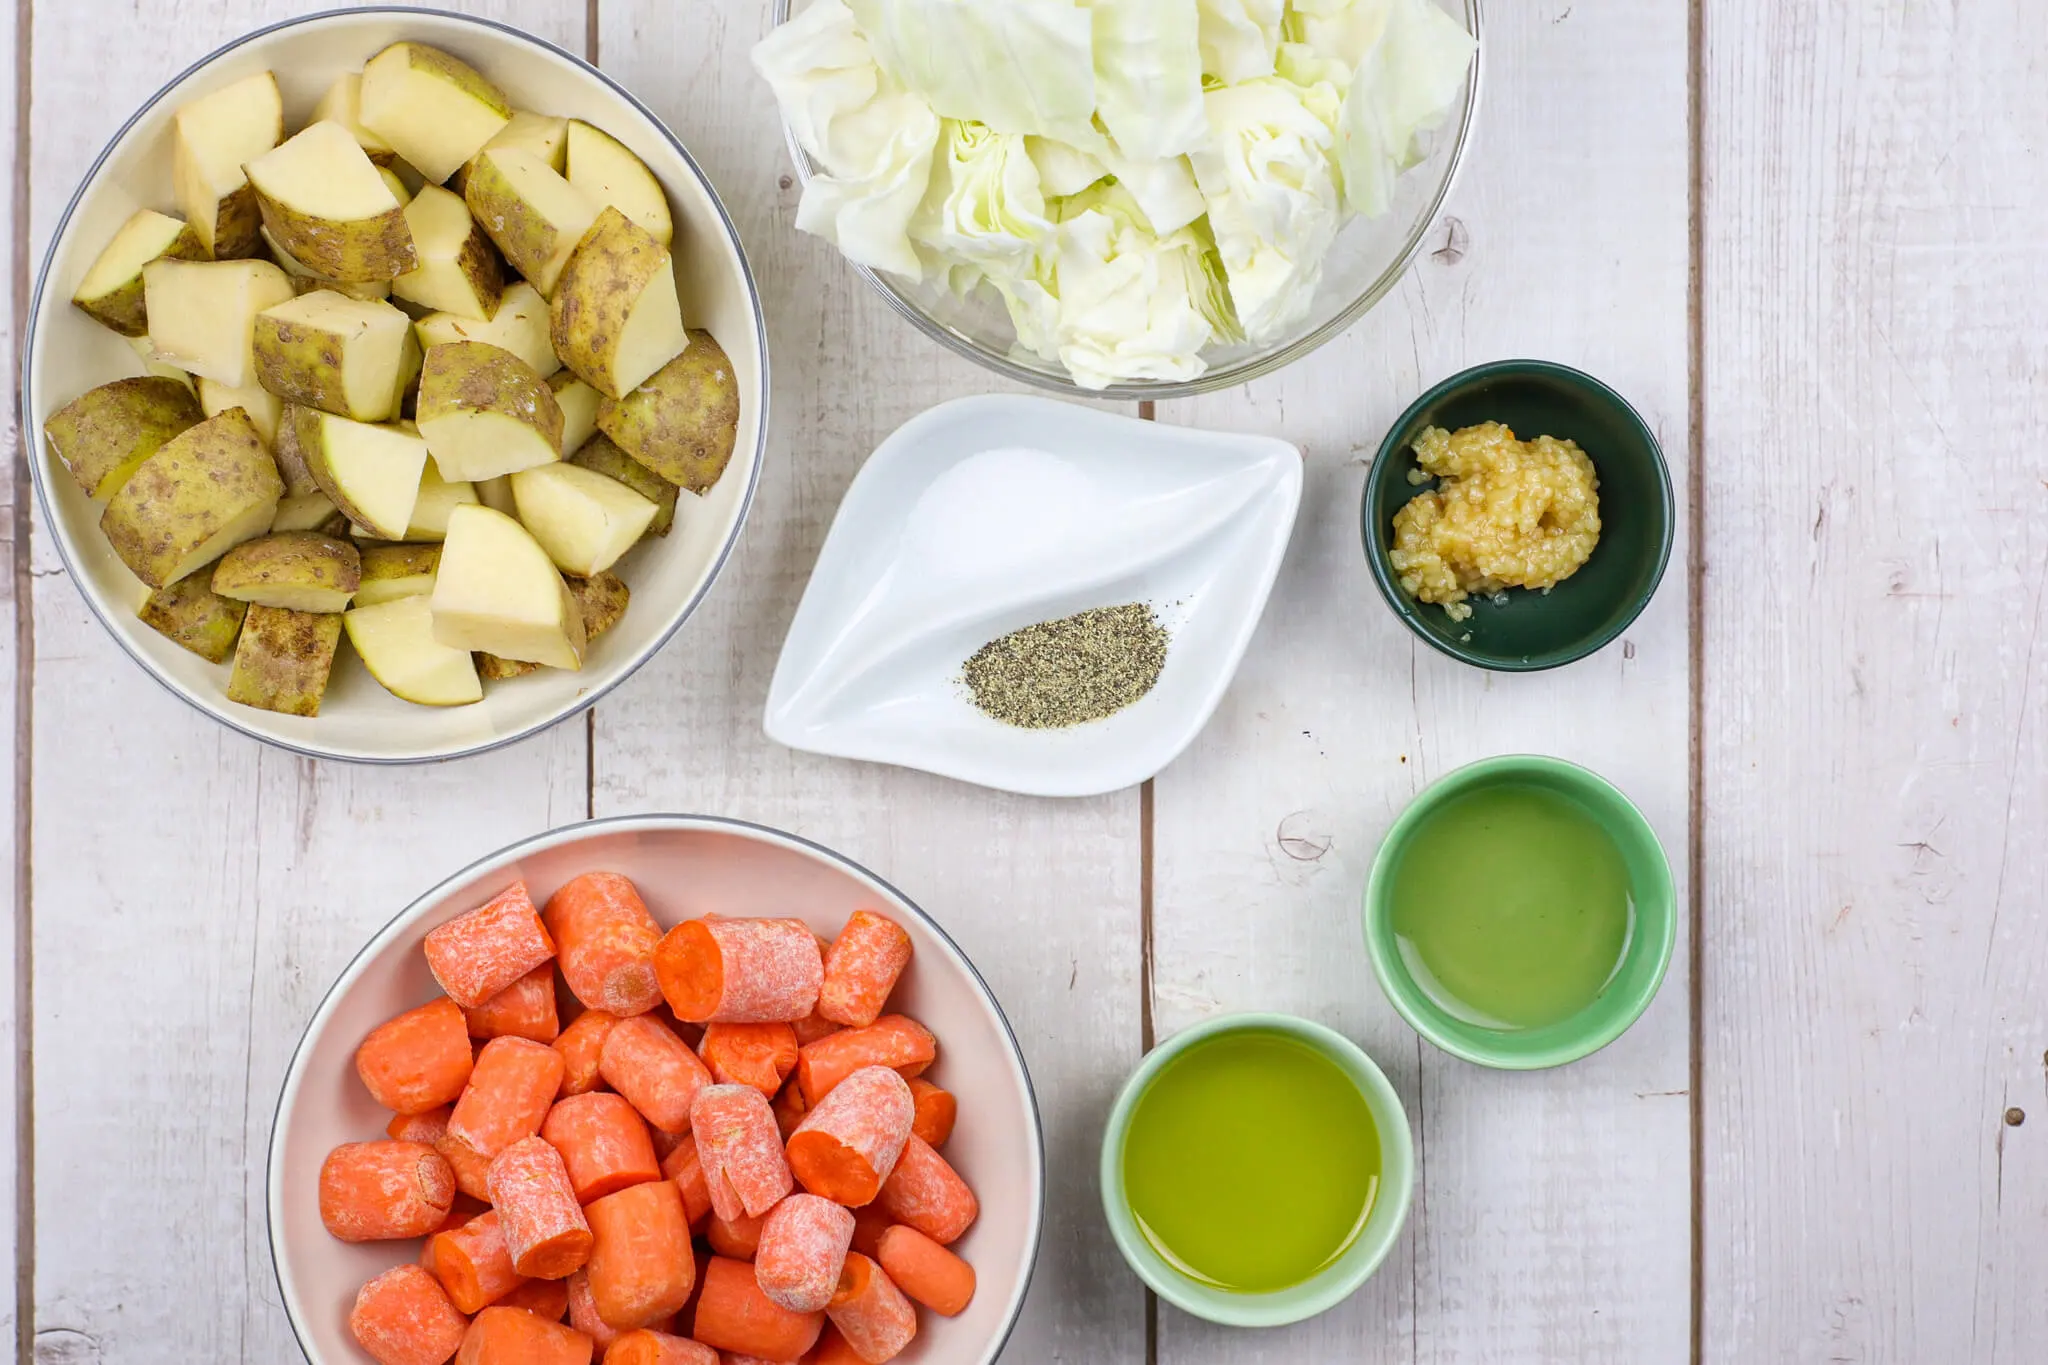 ingredients for slow cooker cabbage potatoes and carrots